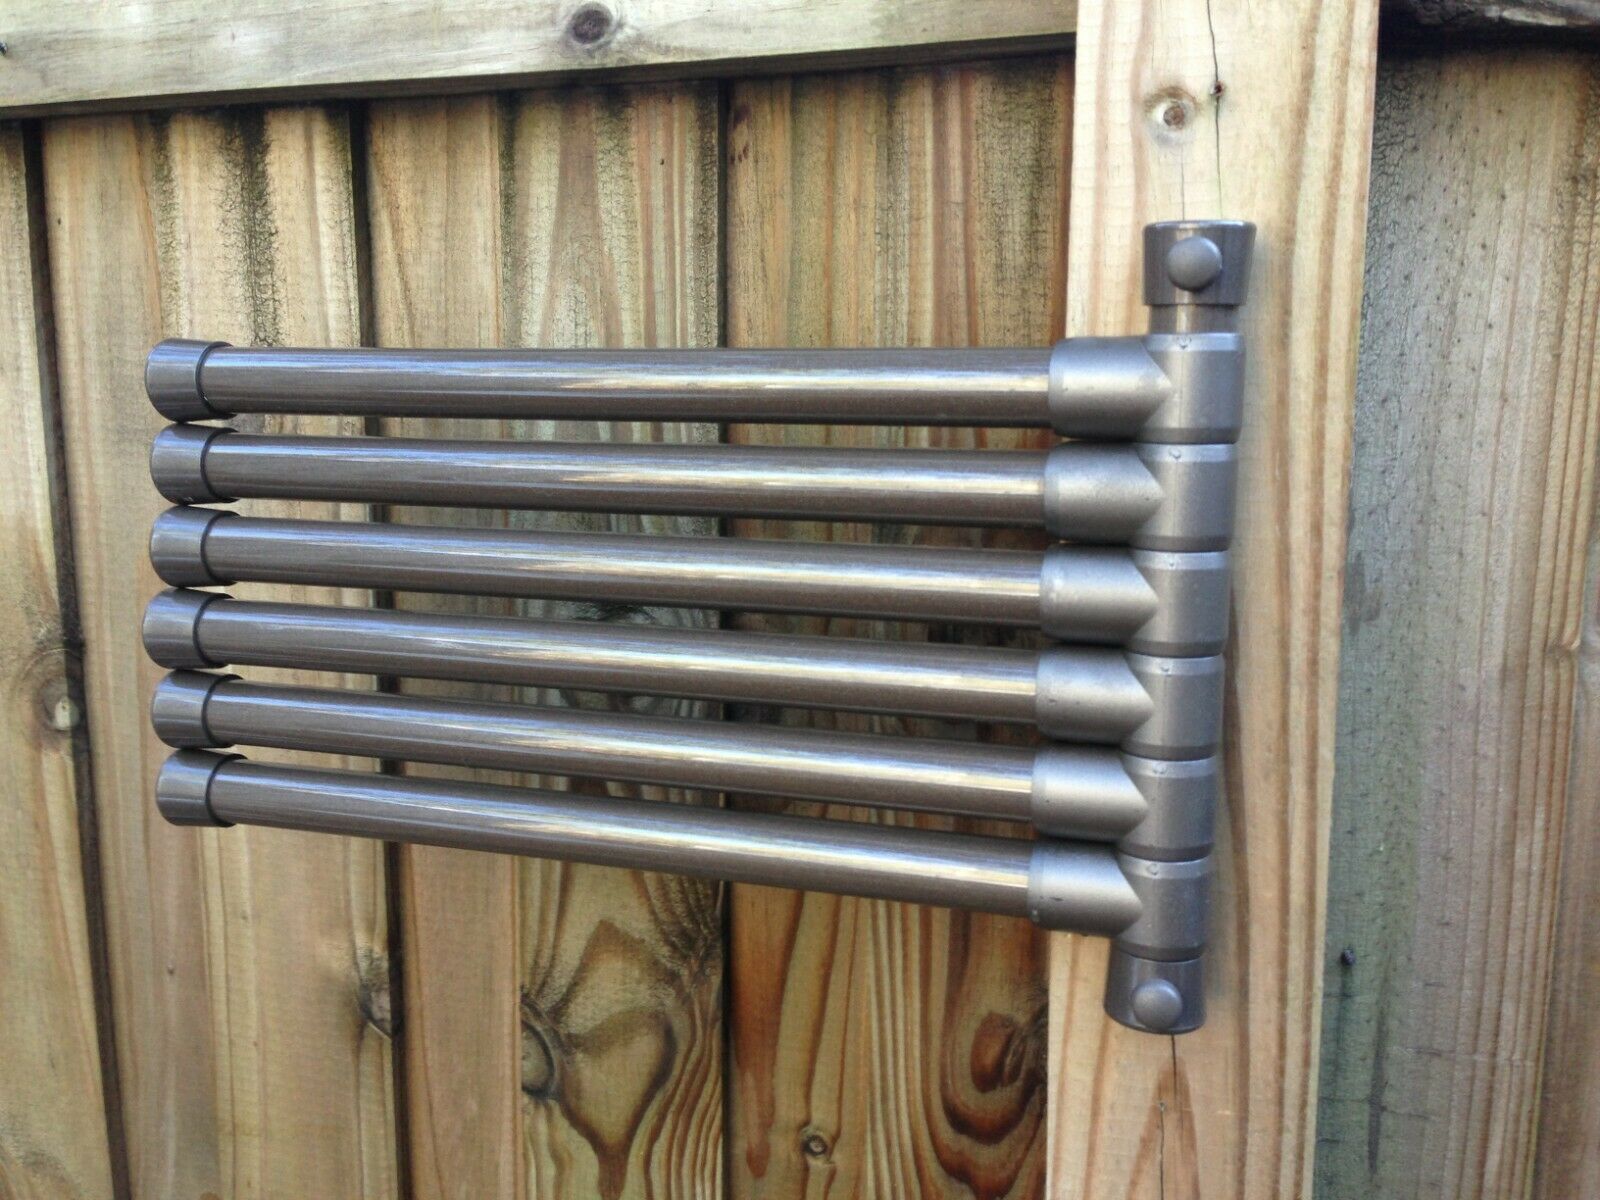 Outdoor Pool Towel Holder Rack - 6 Bar - Wall Mount For Patio Deck Spa, 4 Styles